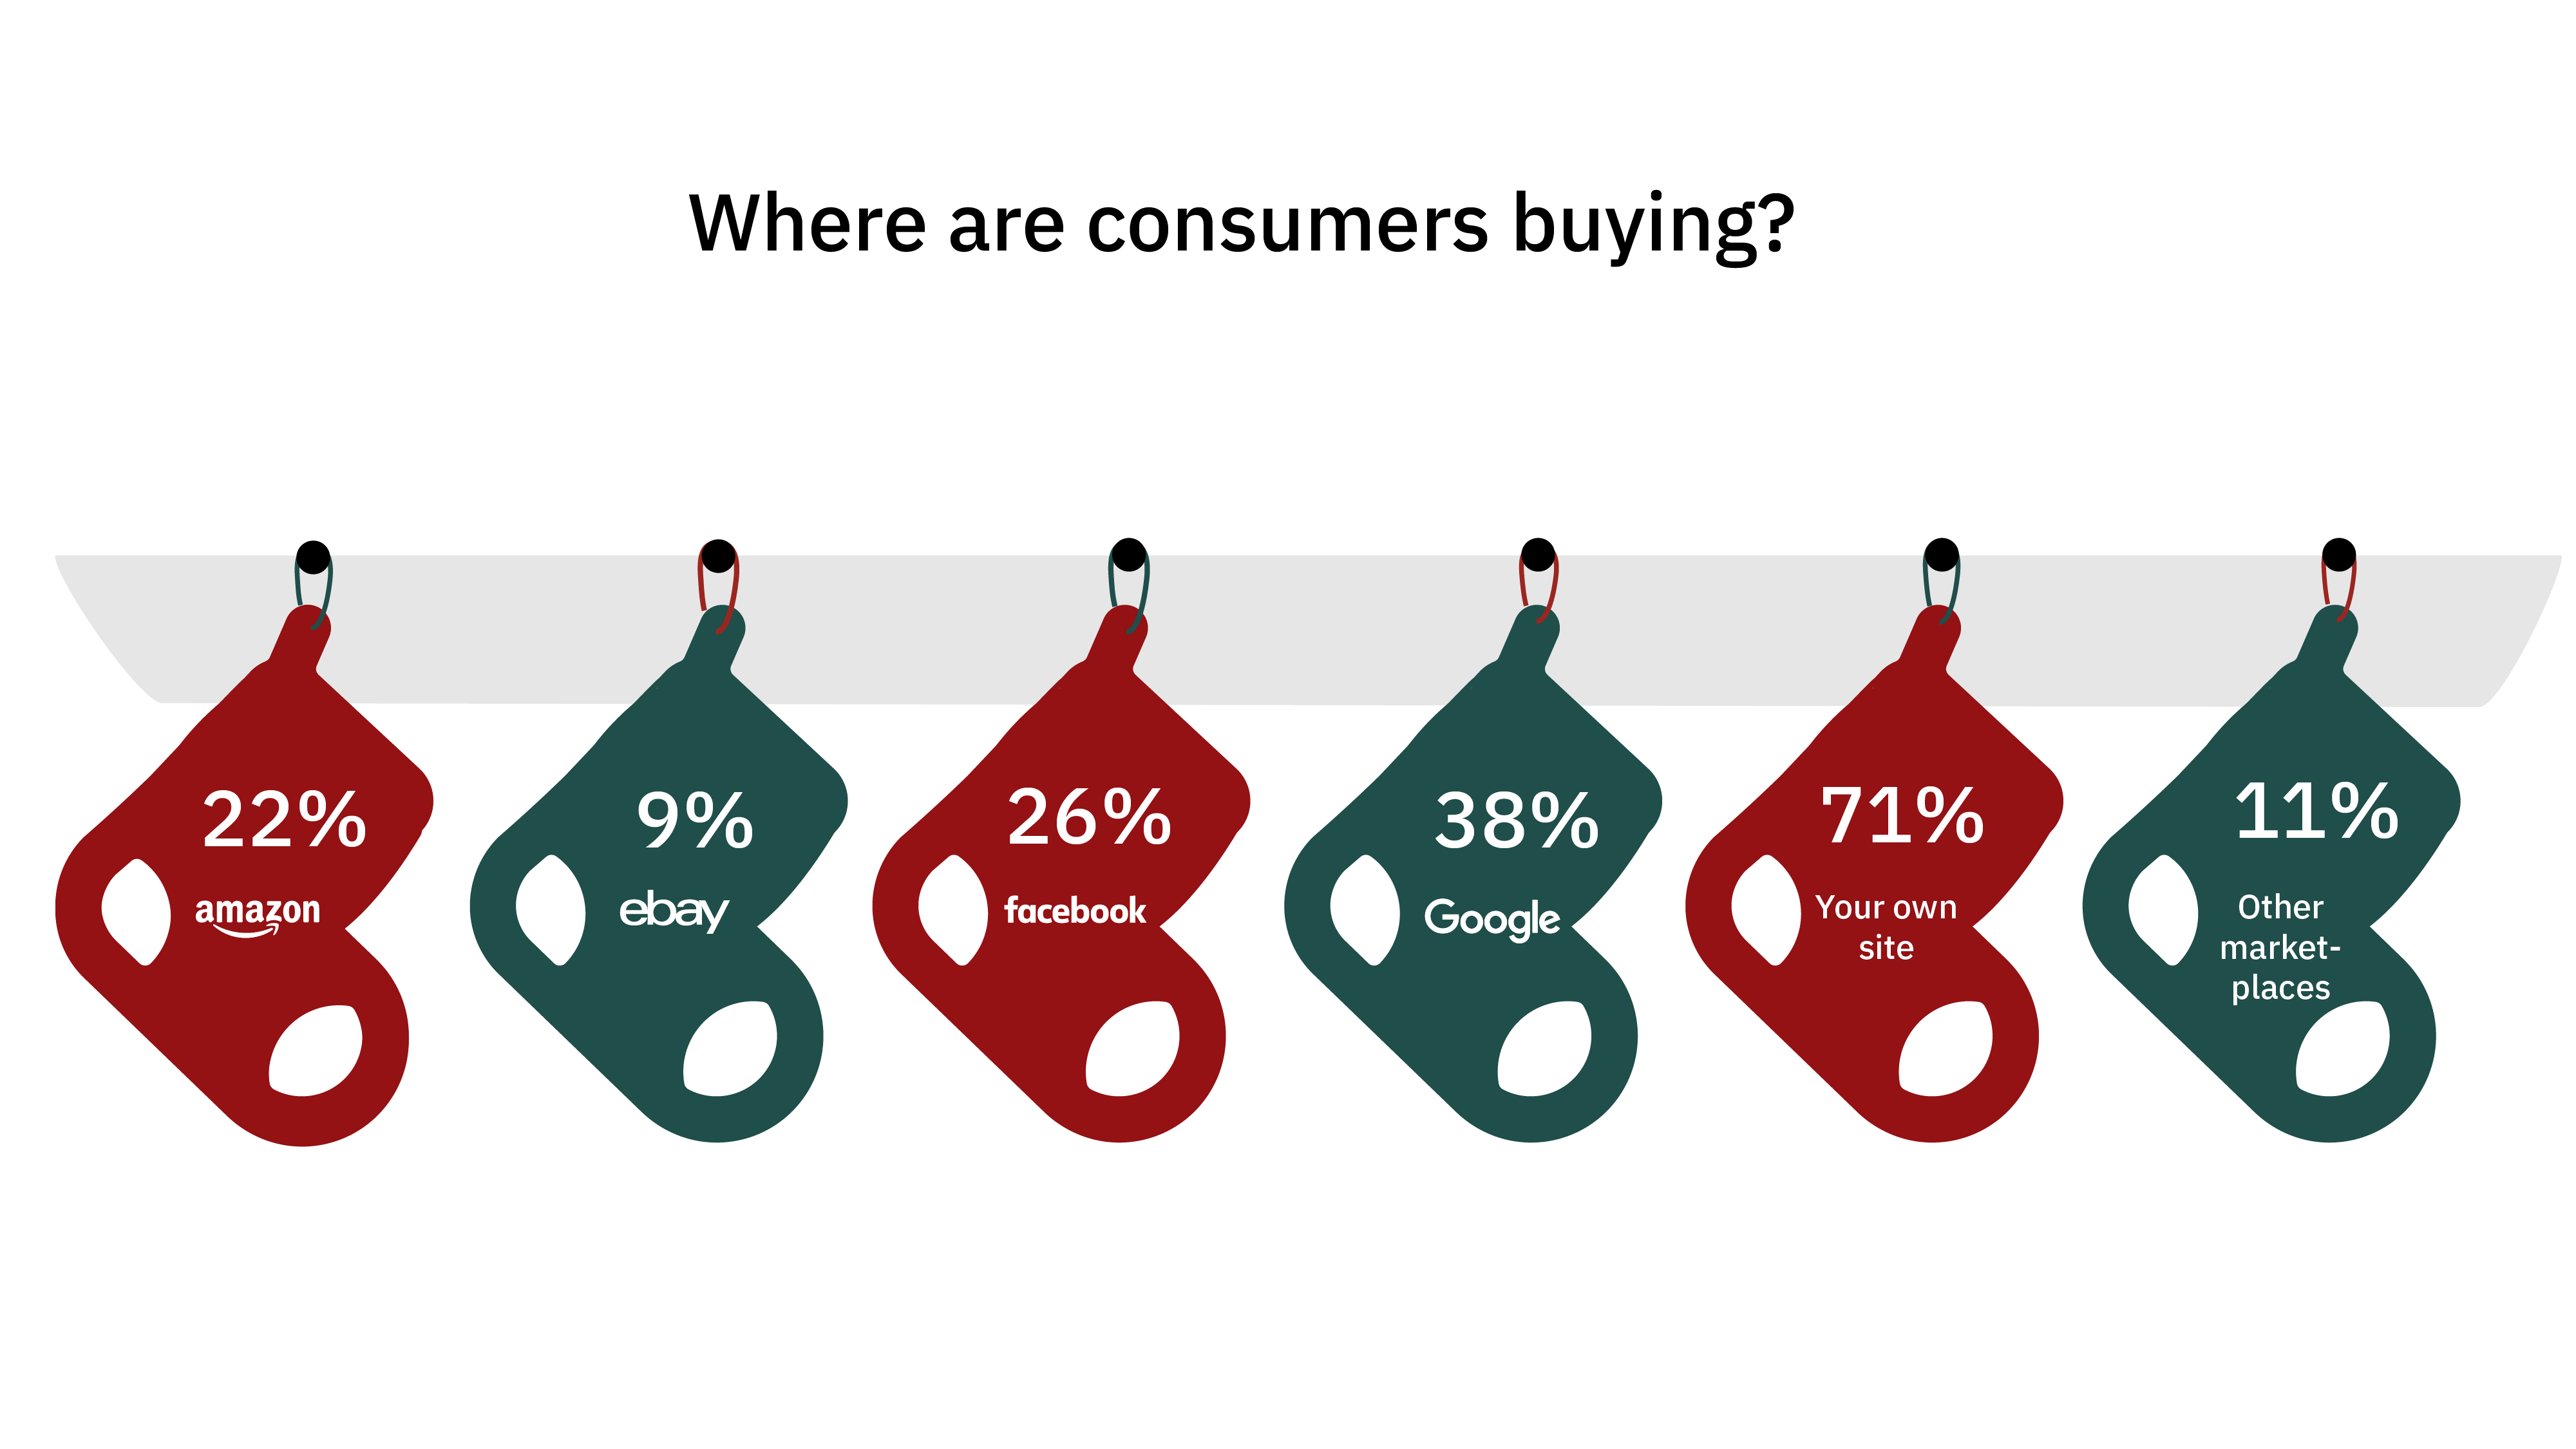 Where are consumers buying?